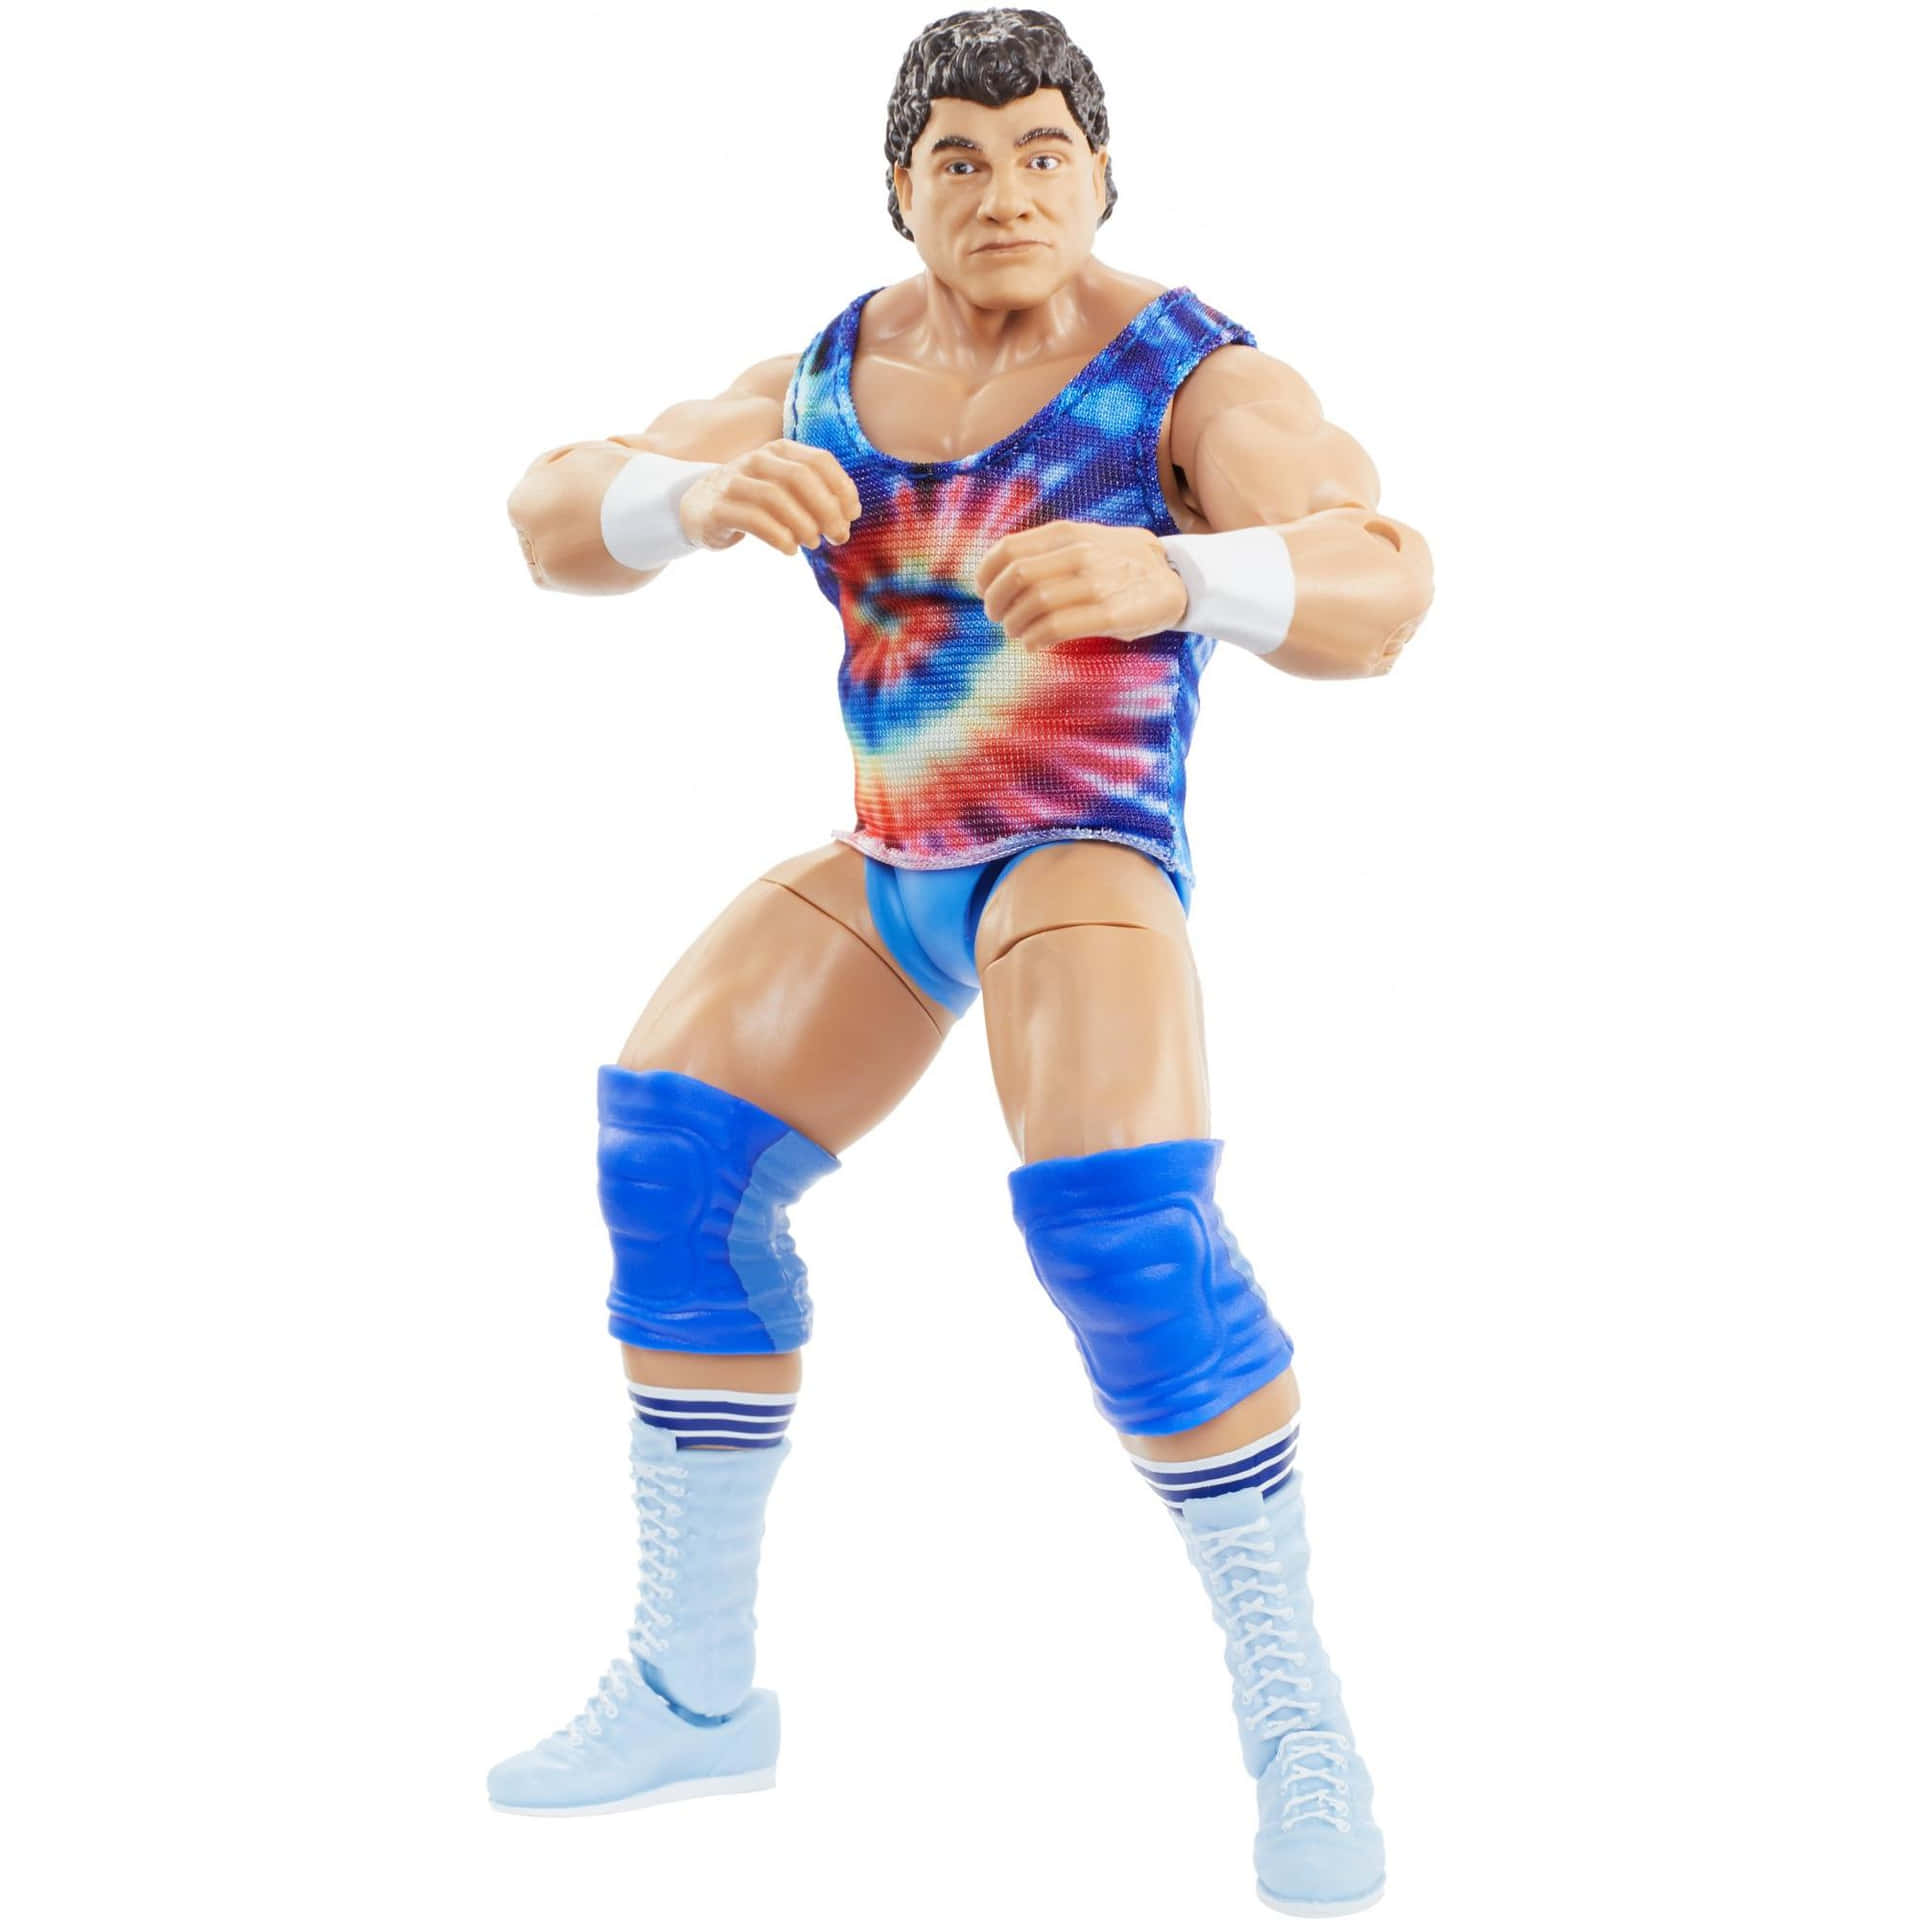 Don Muraco Action Figure Toy Wallpaper